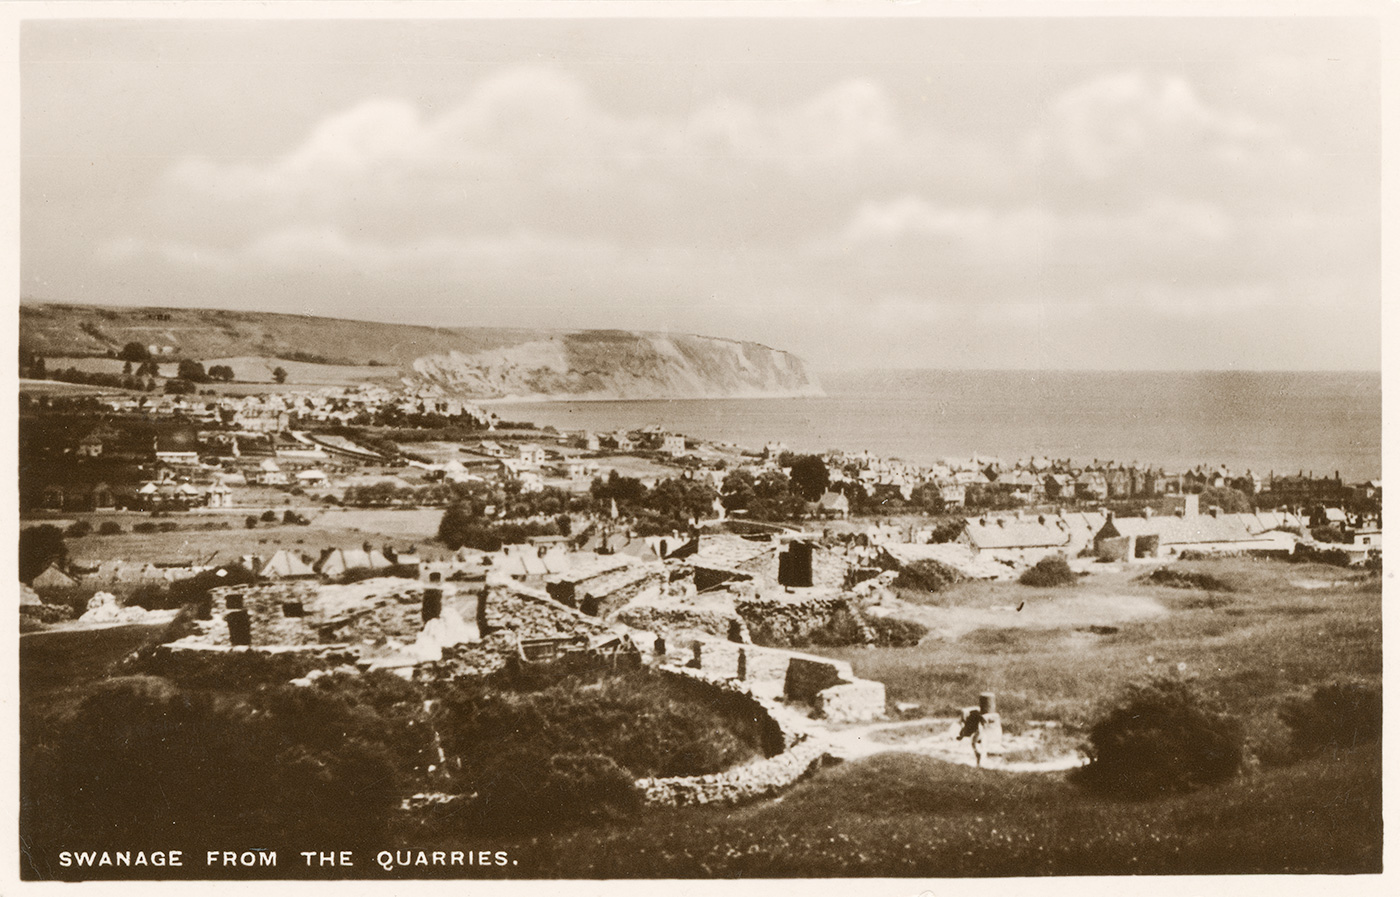 Swanage from the Quarries 1930s